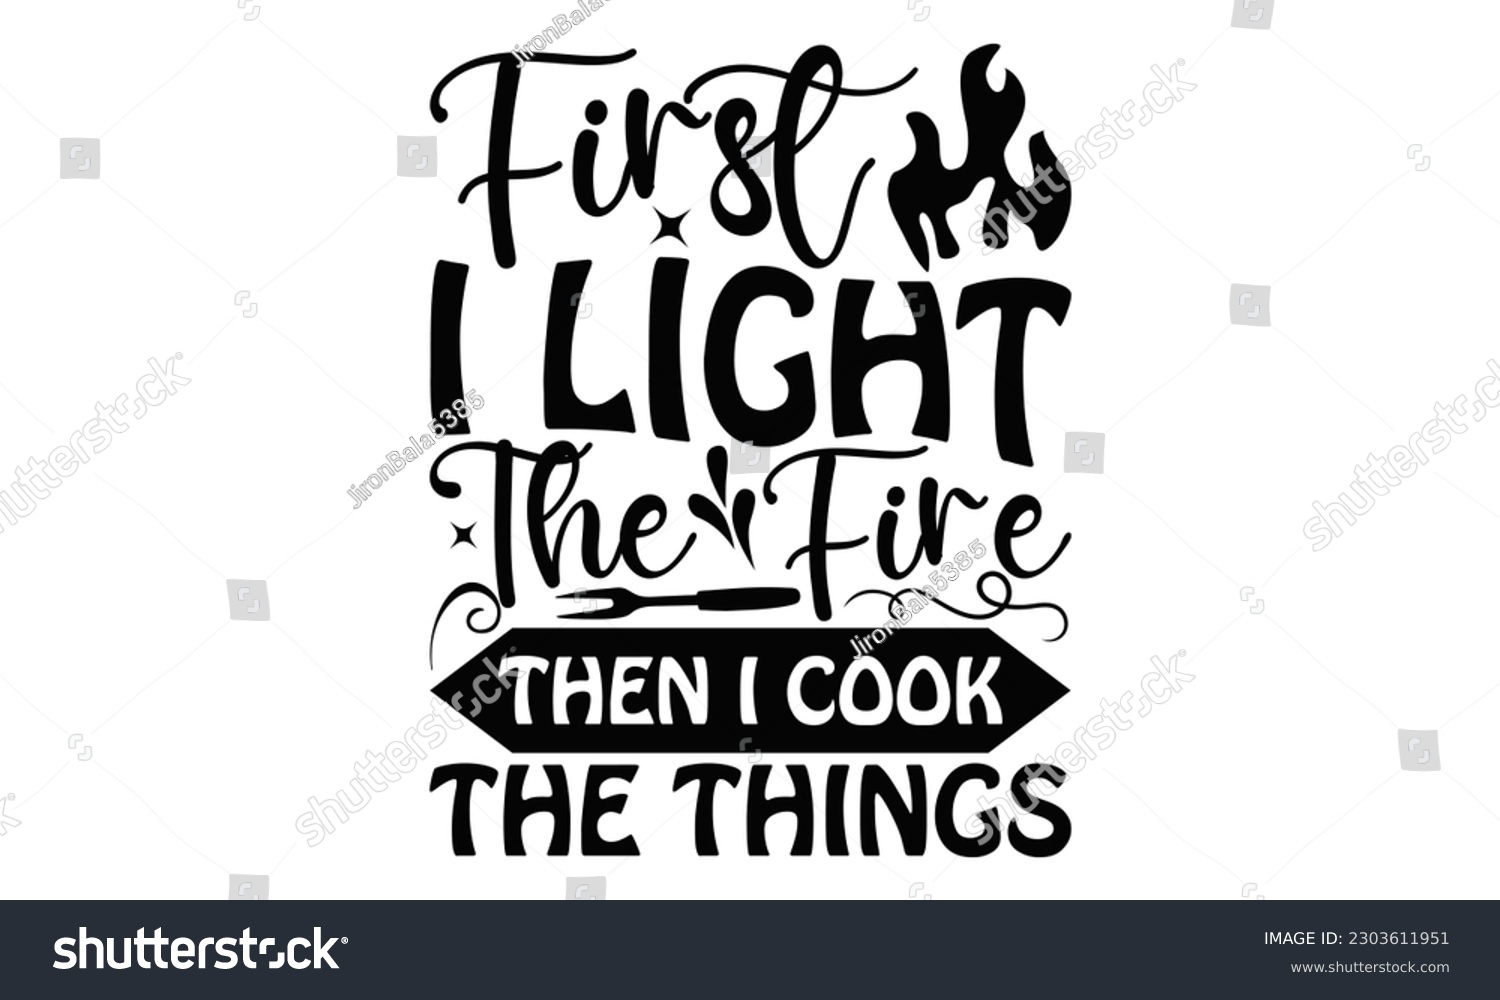 SVG of First I Light The Fire Then I Cook The Things - Barbecue SVG Design, Isolated on white background, Illustration for prints on t-shirts, bags, posters, cards and Mug.
 svg